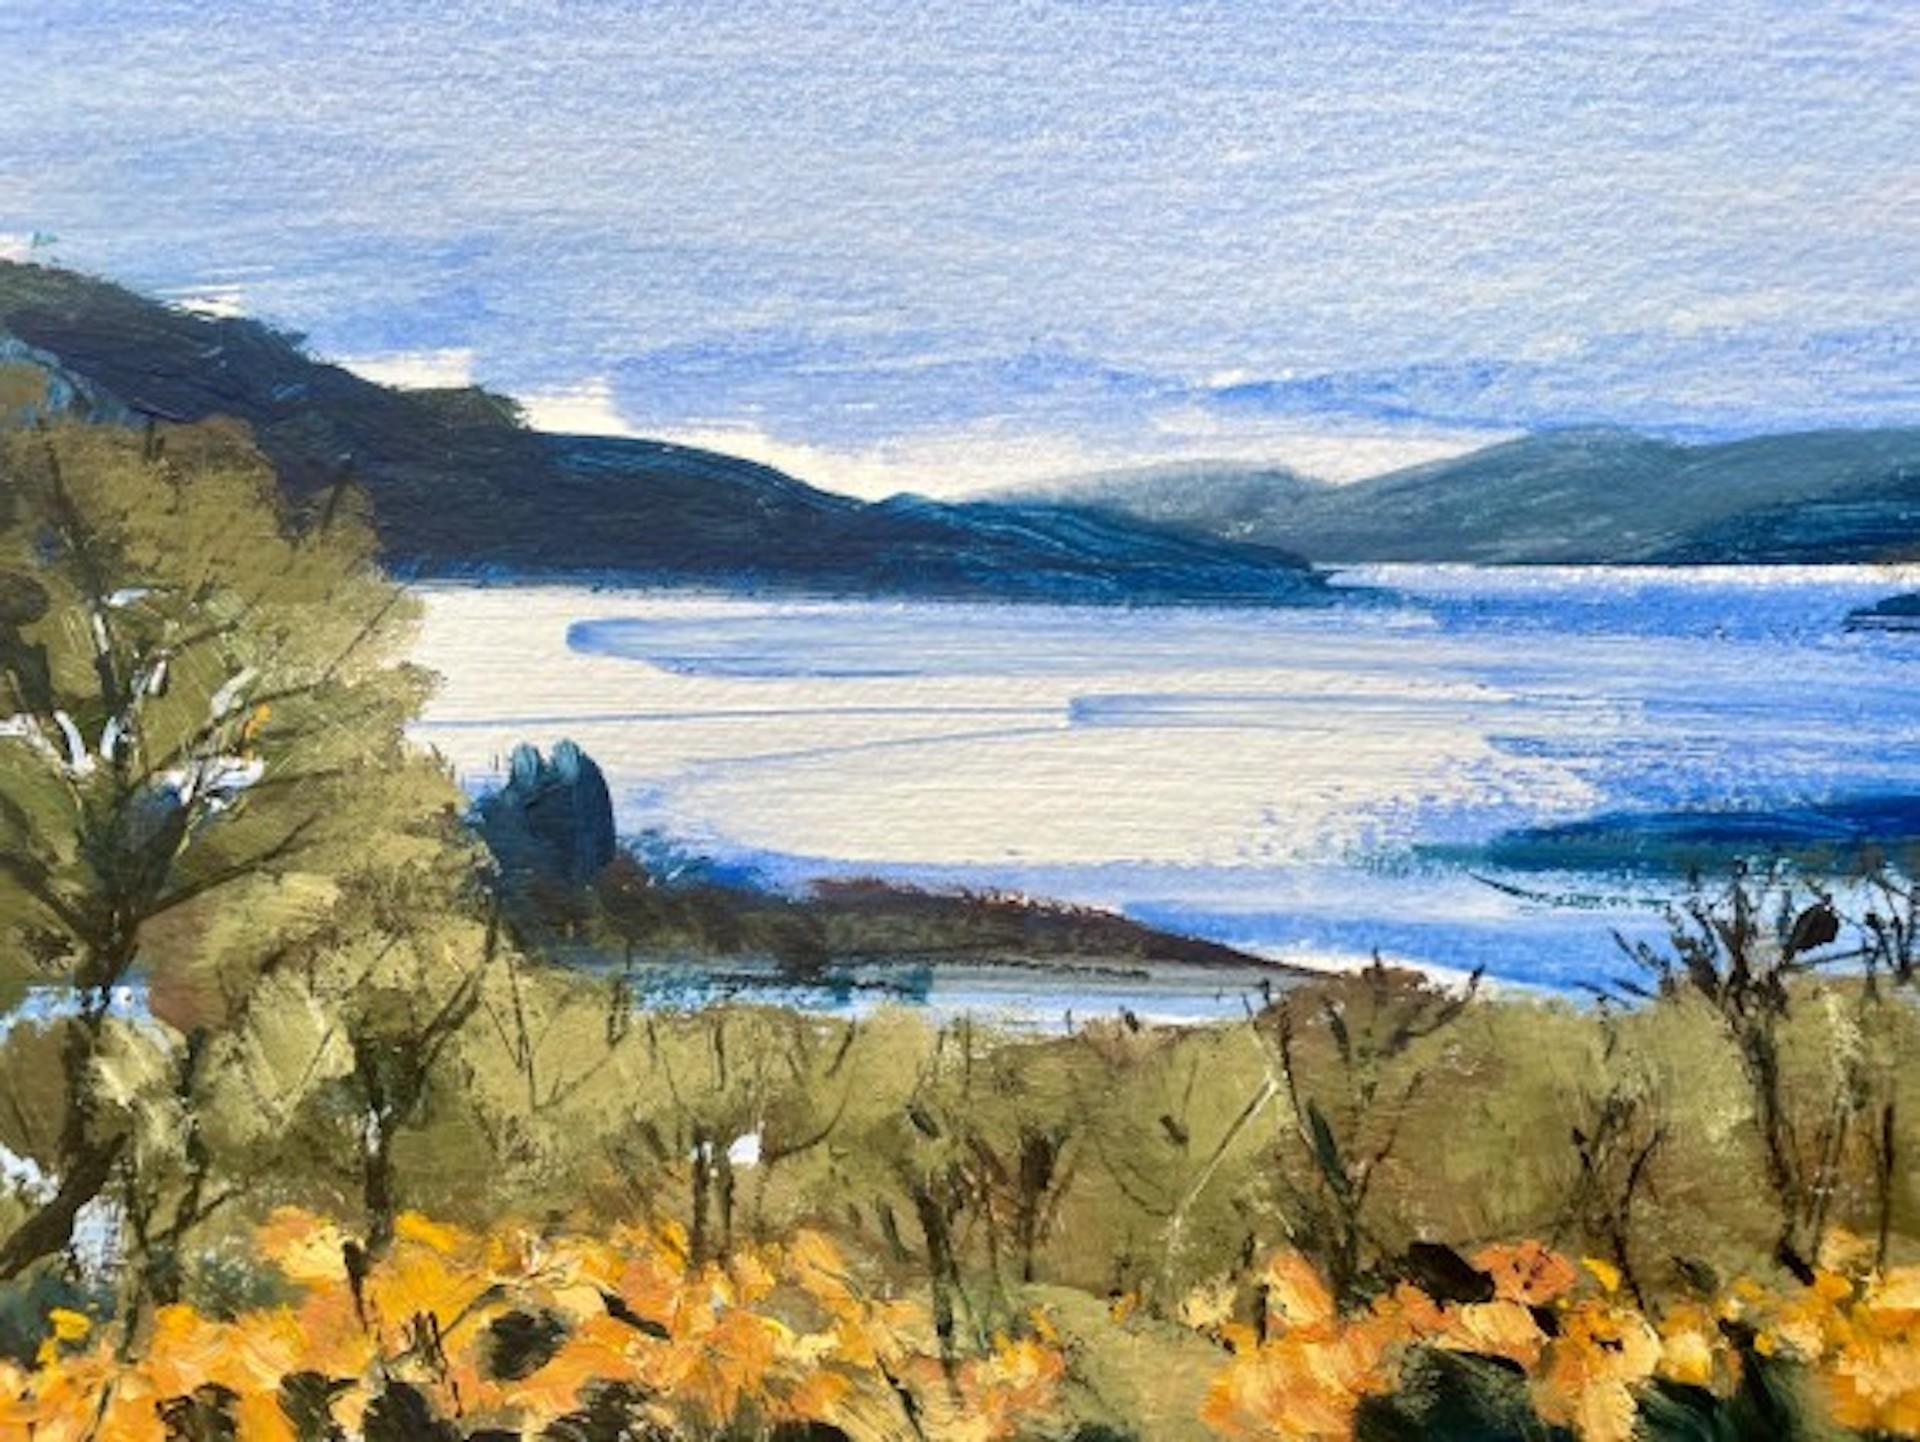 Autumn sunshine over the loch by Natalie Bird [2021]
original

Mixed media

Image size: H:20 cm x W:25 cm

Complete Size of Unframed Work: H:28 cm x W:36 cm x D:1cm

Sold Unframed

Please note that insitu images are purely an indication of how a